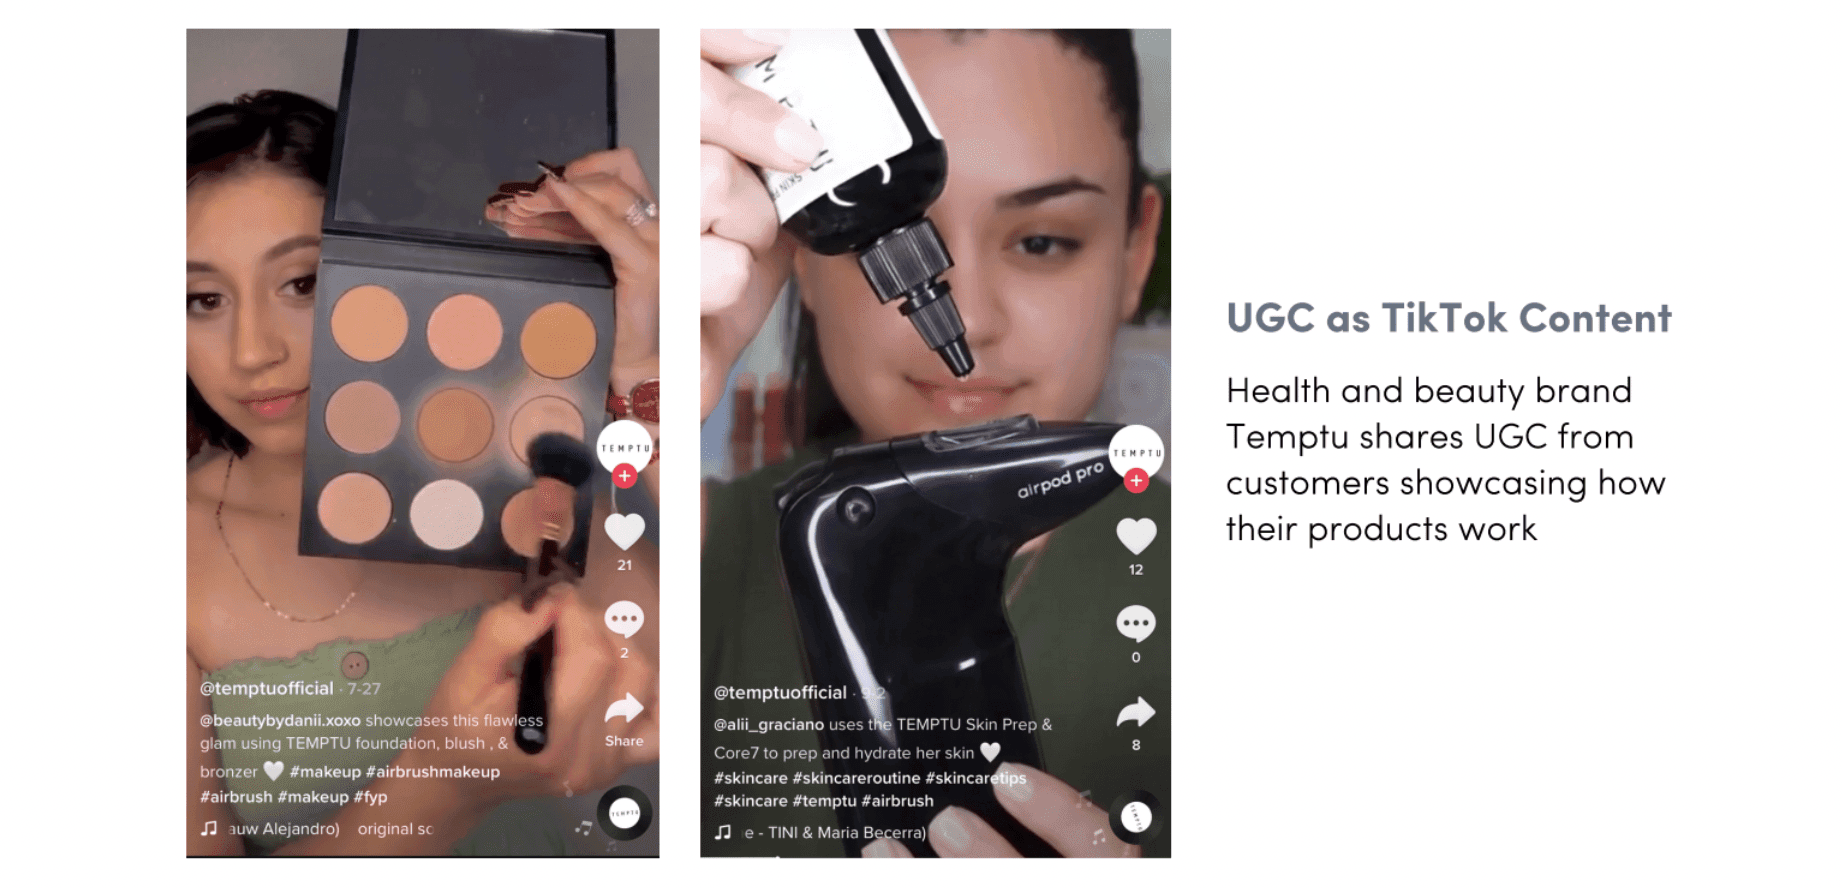 Temptu consistently shares how fans use its products to create their looks.